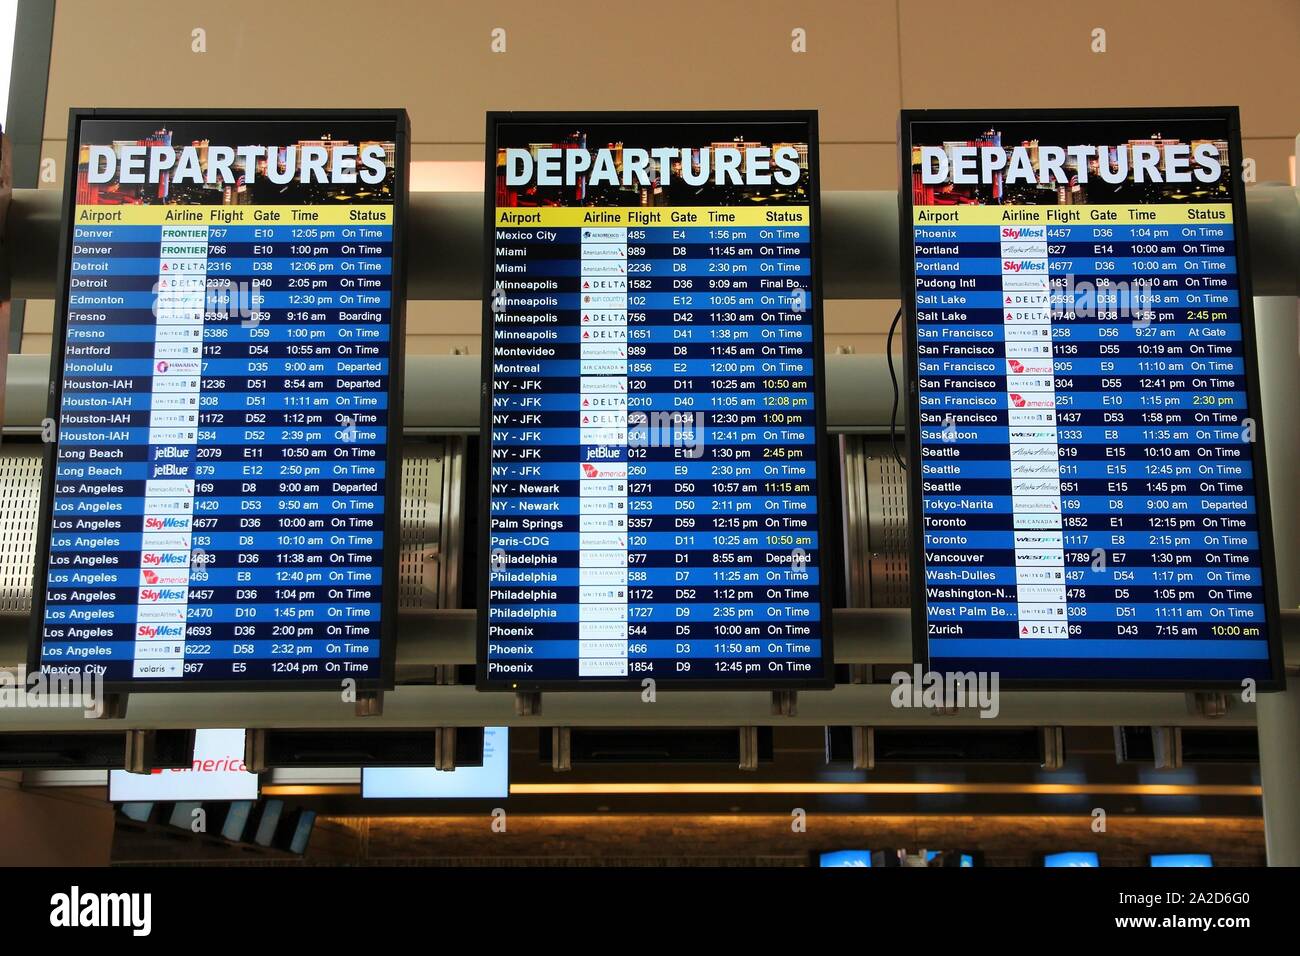 LAS VEGAS, USA - APRIL 15, 2014: Flight status screens at Las Vegas McCarran International Airportt in USA. It was the 24th busiest airport in the wor Stock Photo